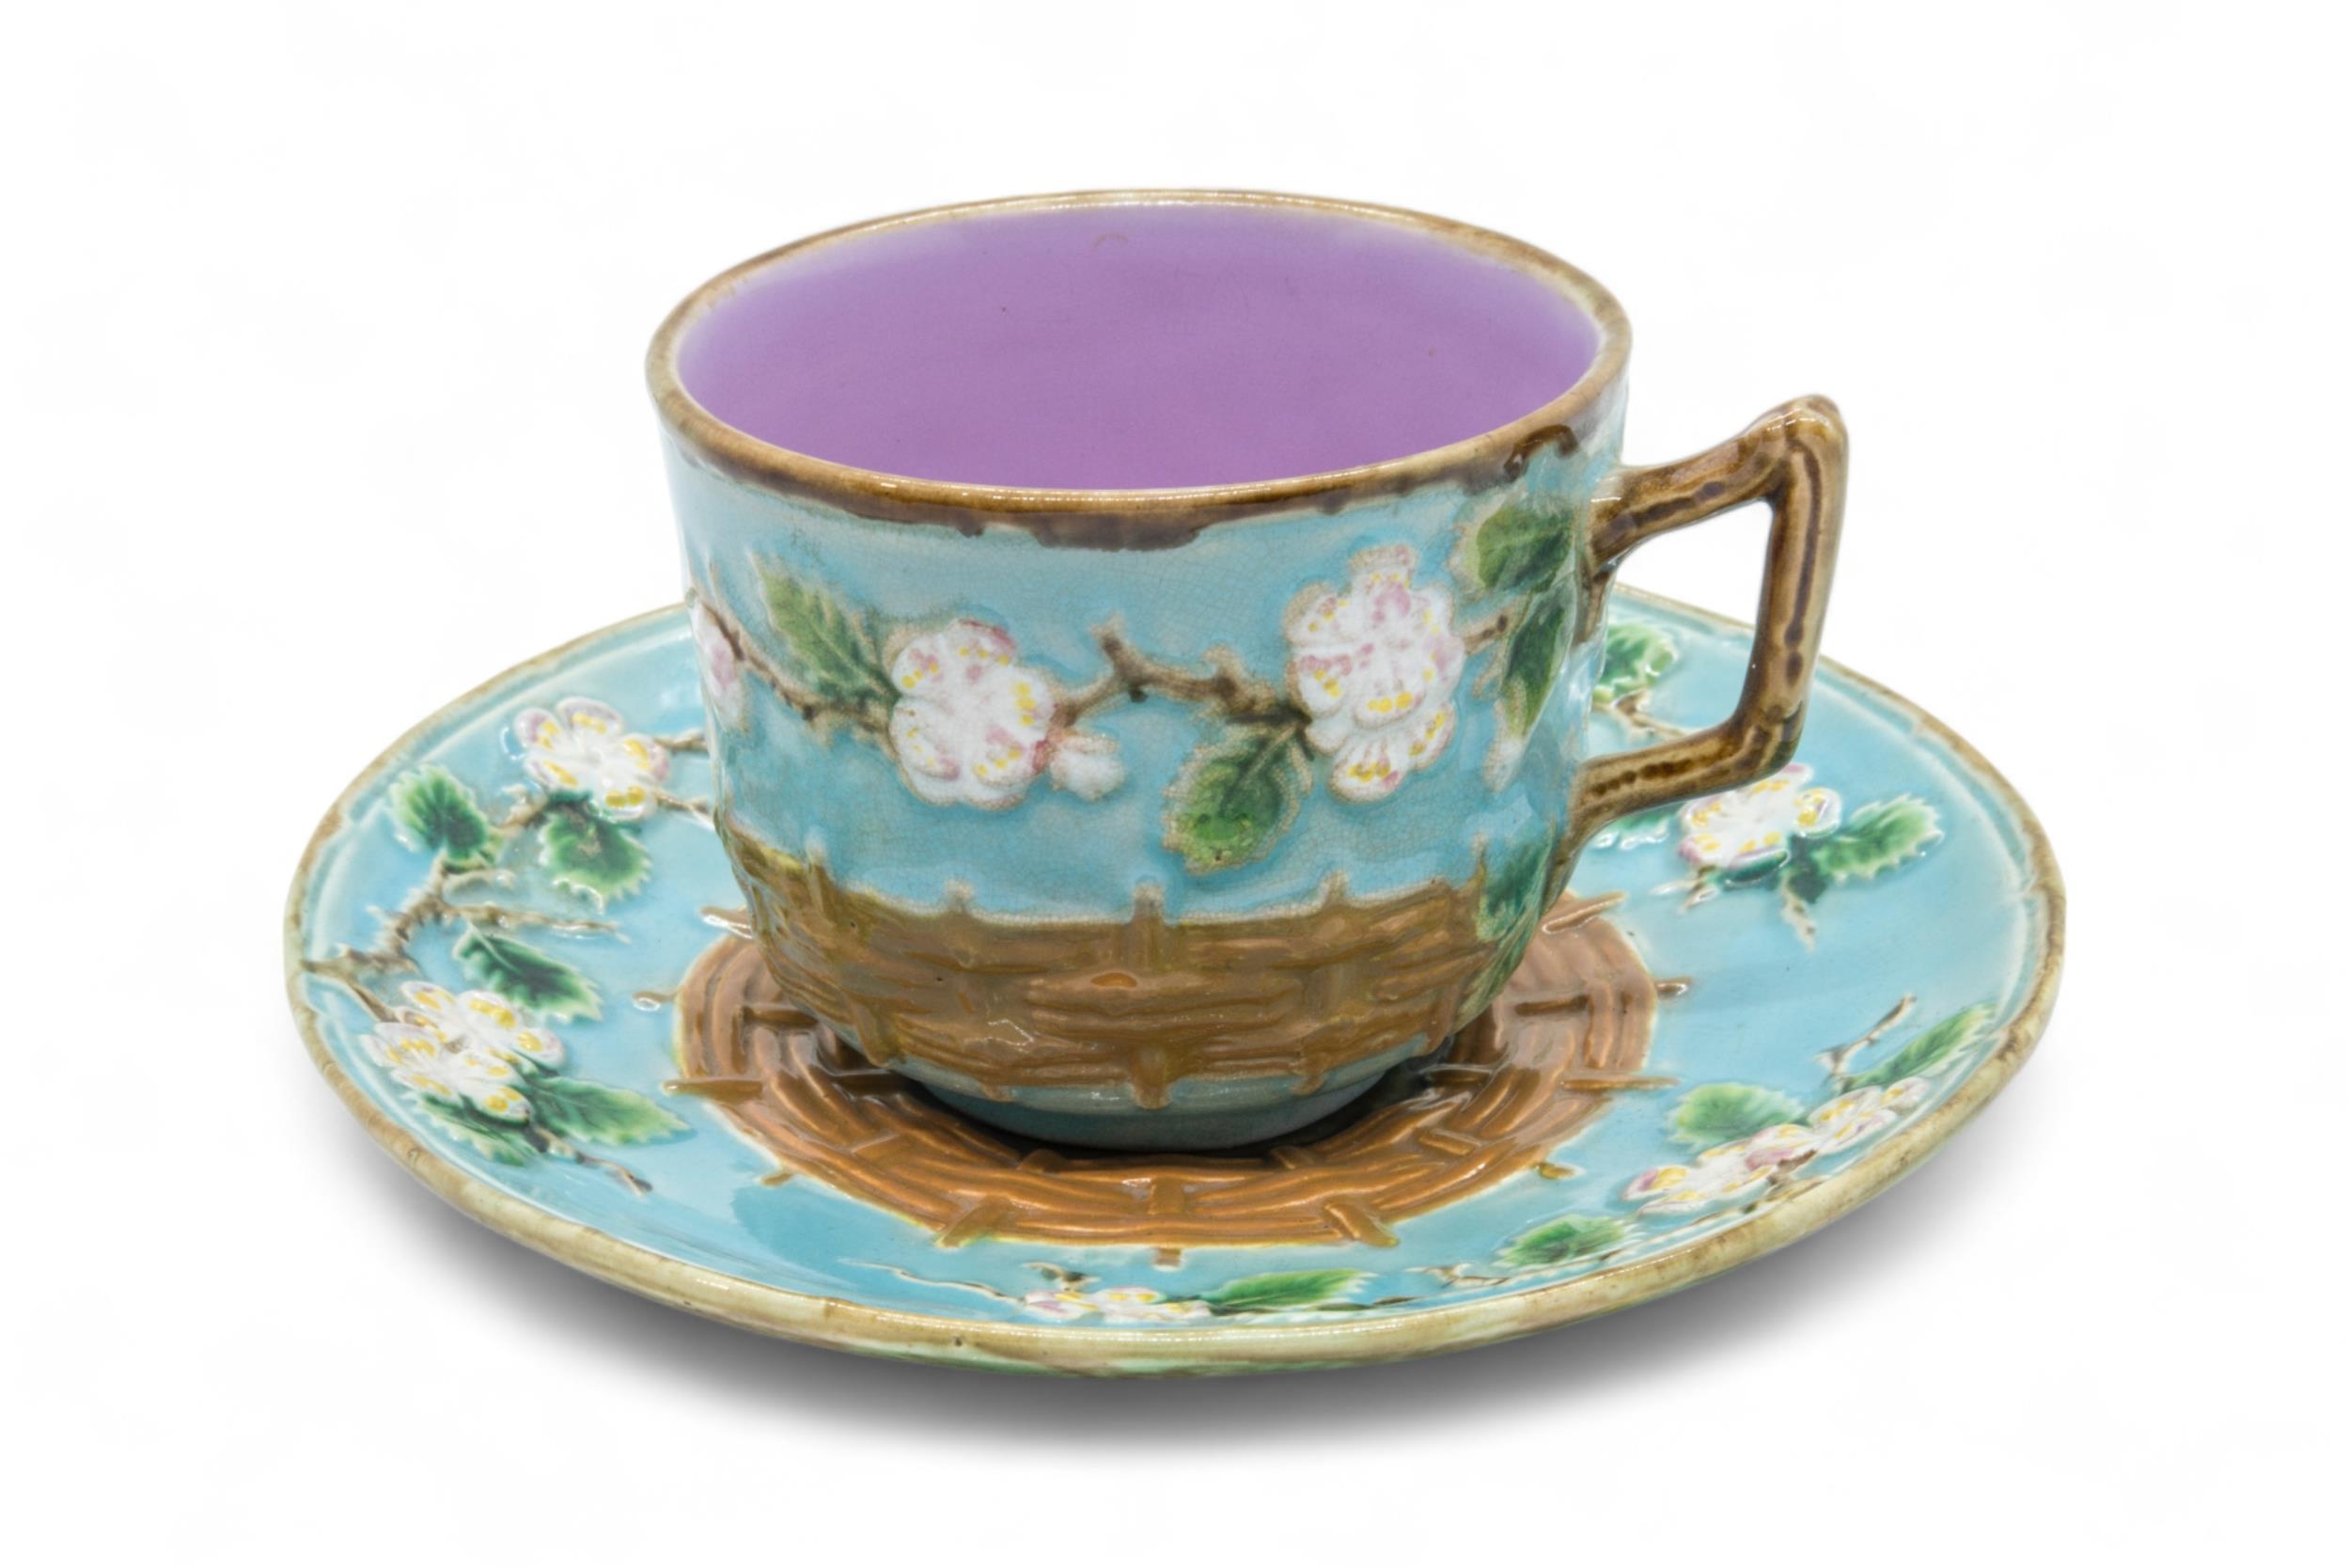 A GEORGE JONES MAJOLICA CUP AND SAUCER Late 19th century, together with a majolica tazza, tazza is - Image 3 of 3